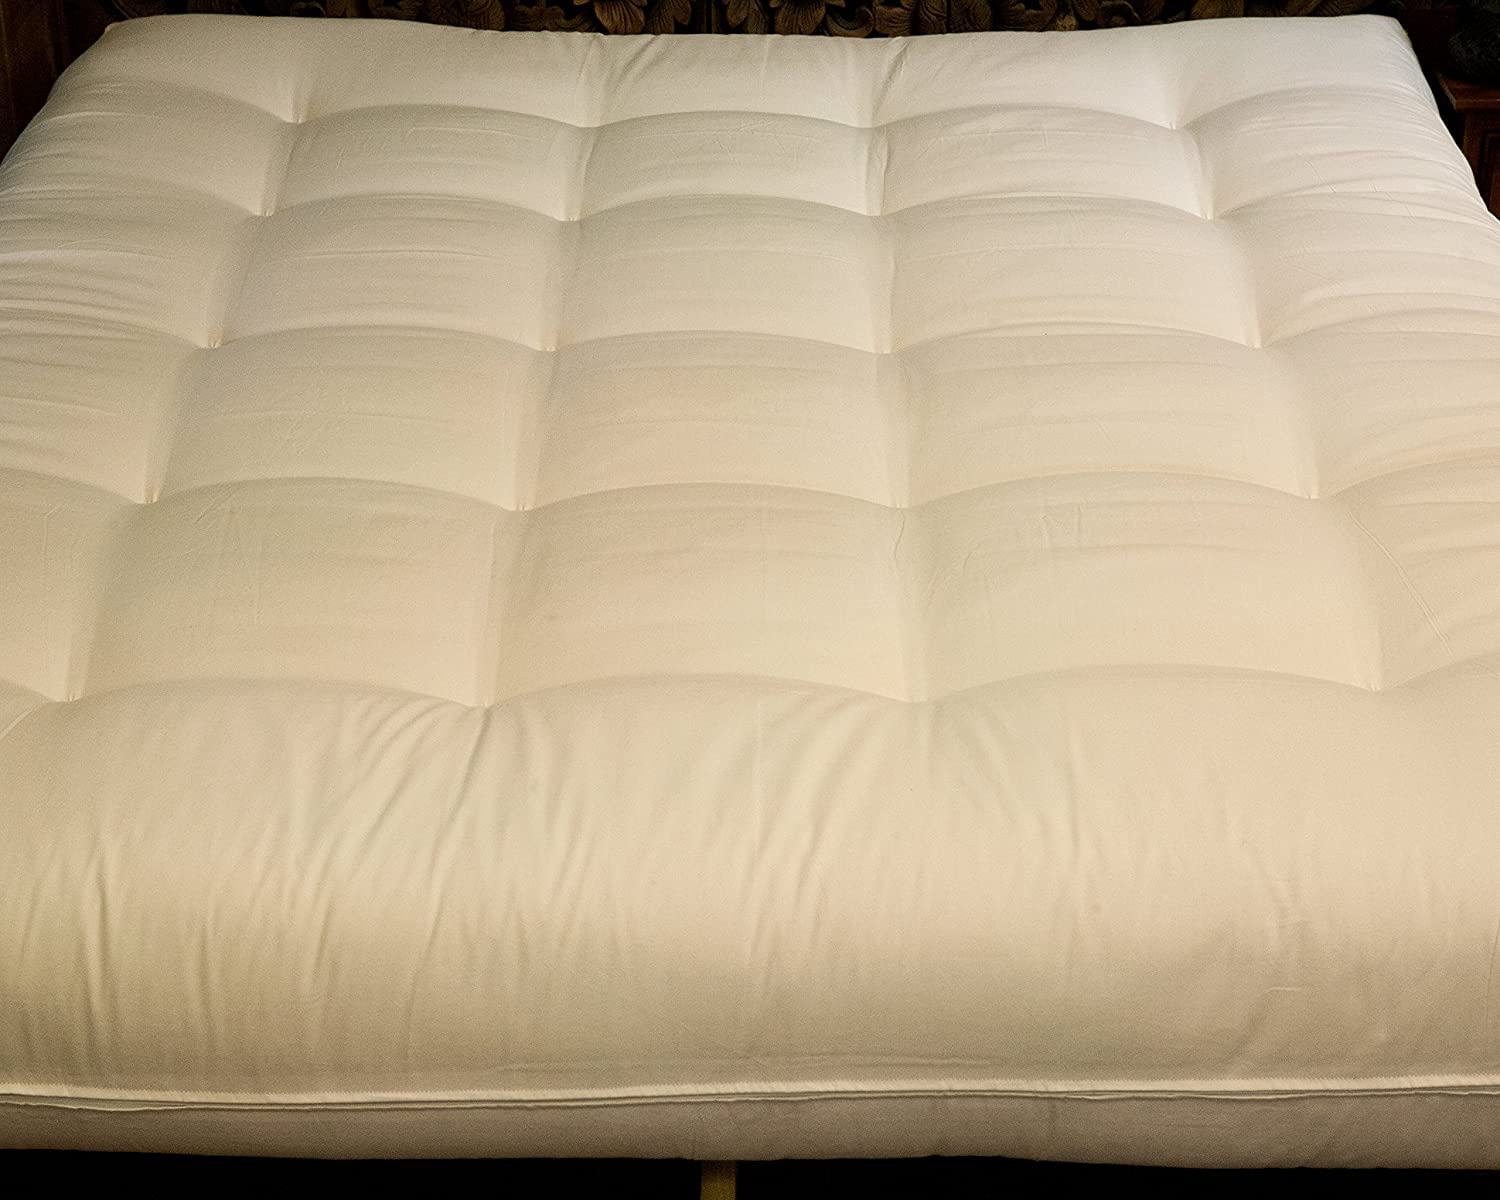 Ccf-03-f Full Size Deluxe With Wool Futon Mattress